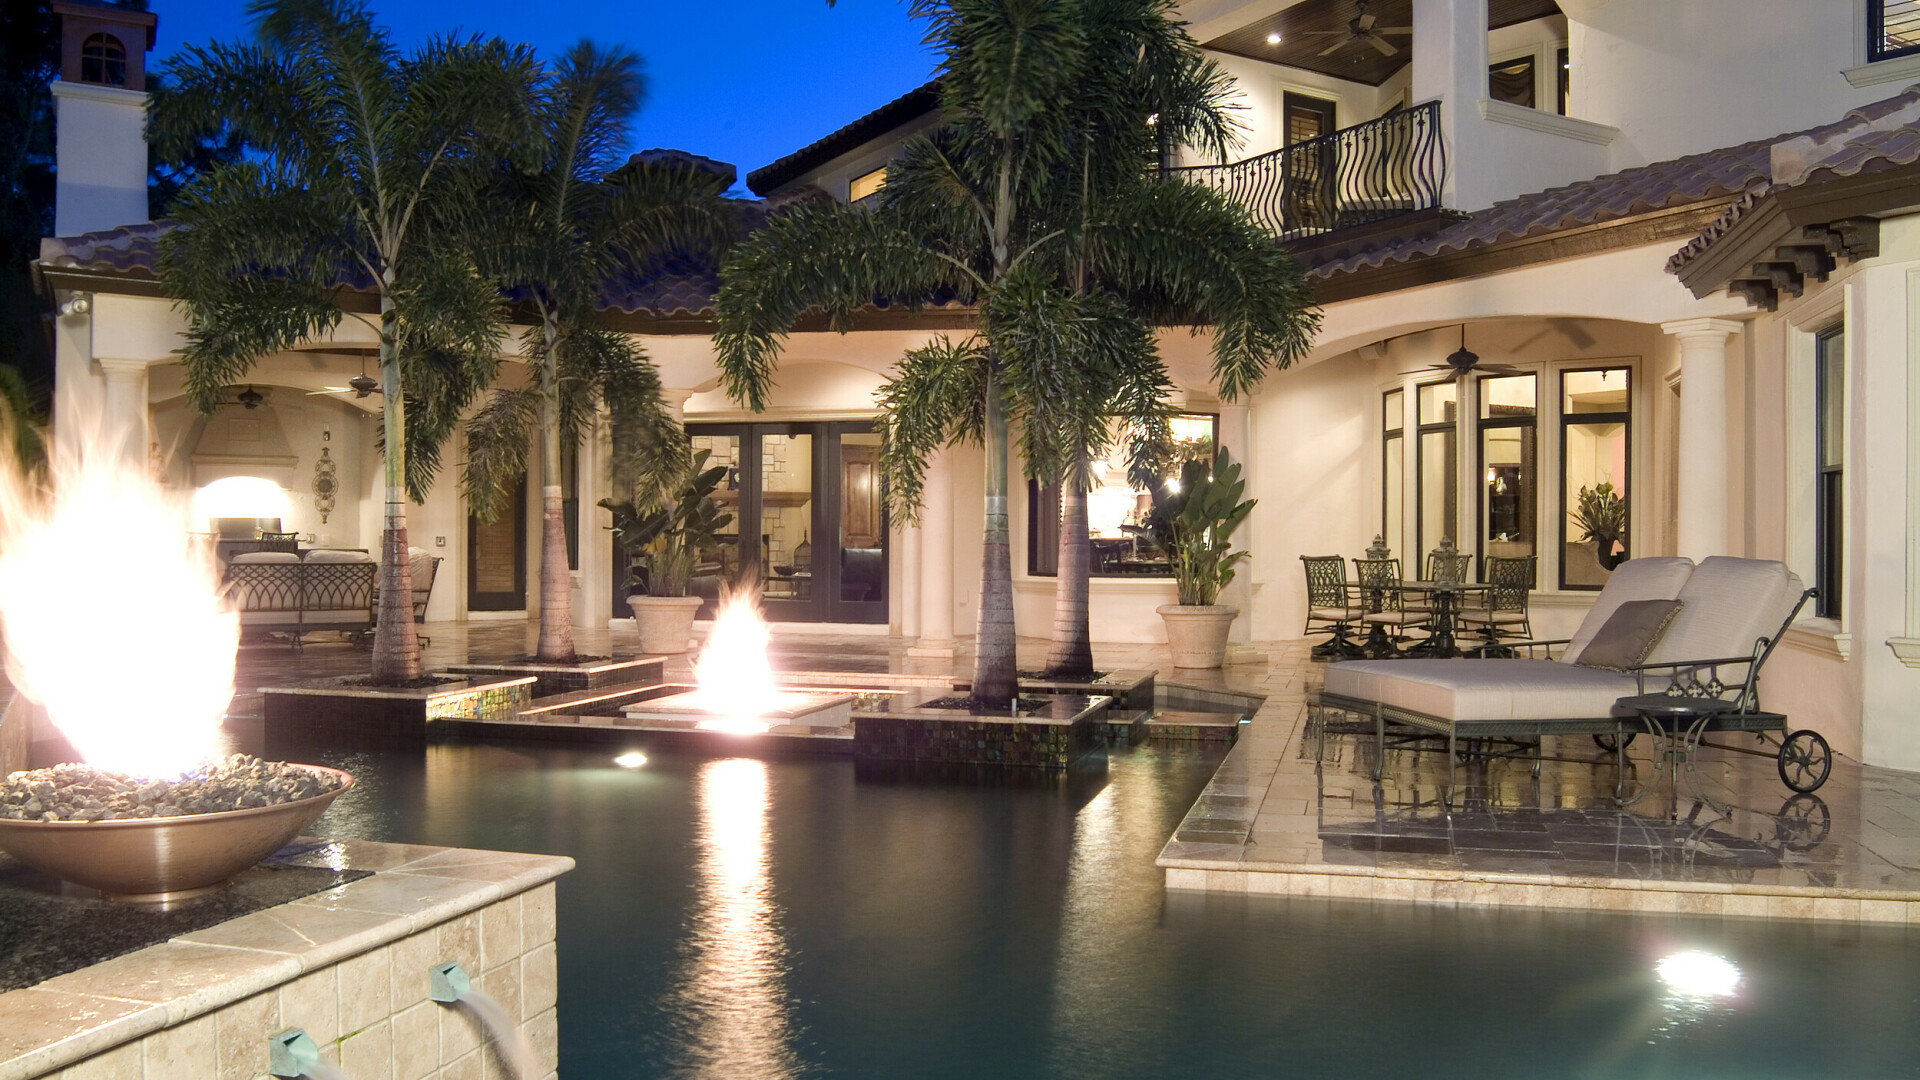 Luxury home featuring a large pool, firepit, a fireplace, and a custom outdoor kitchen, Tampa Bay FL